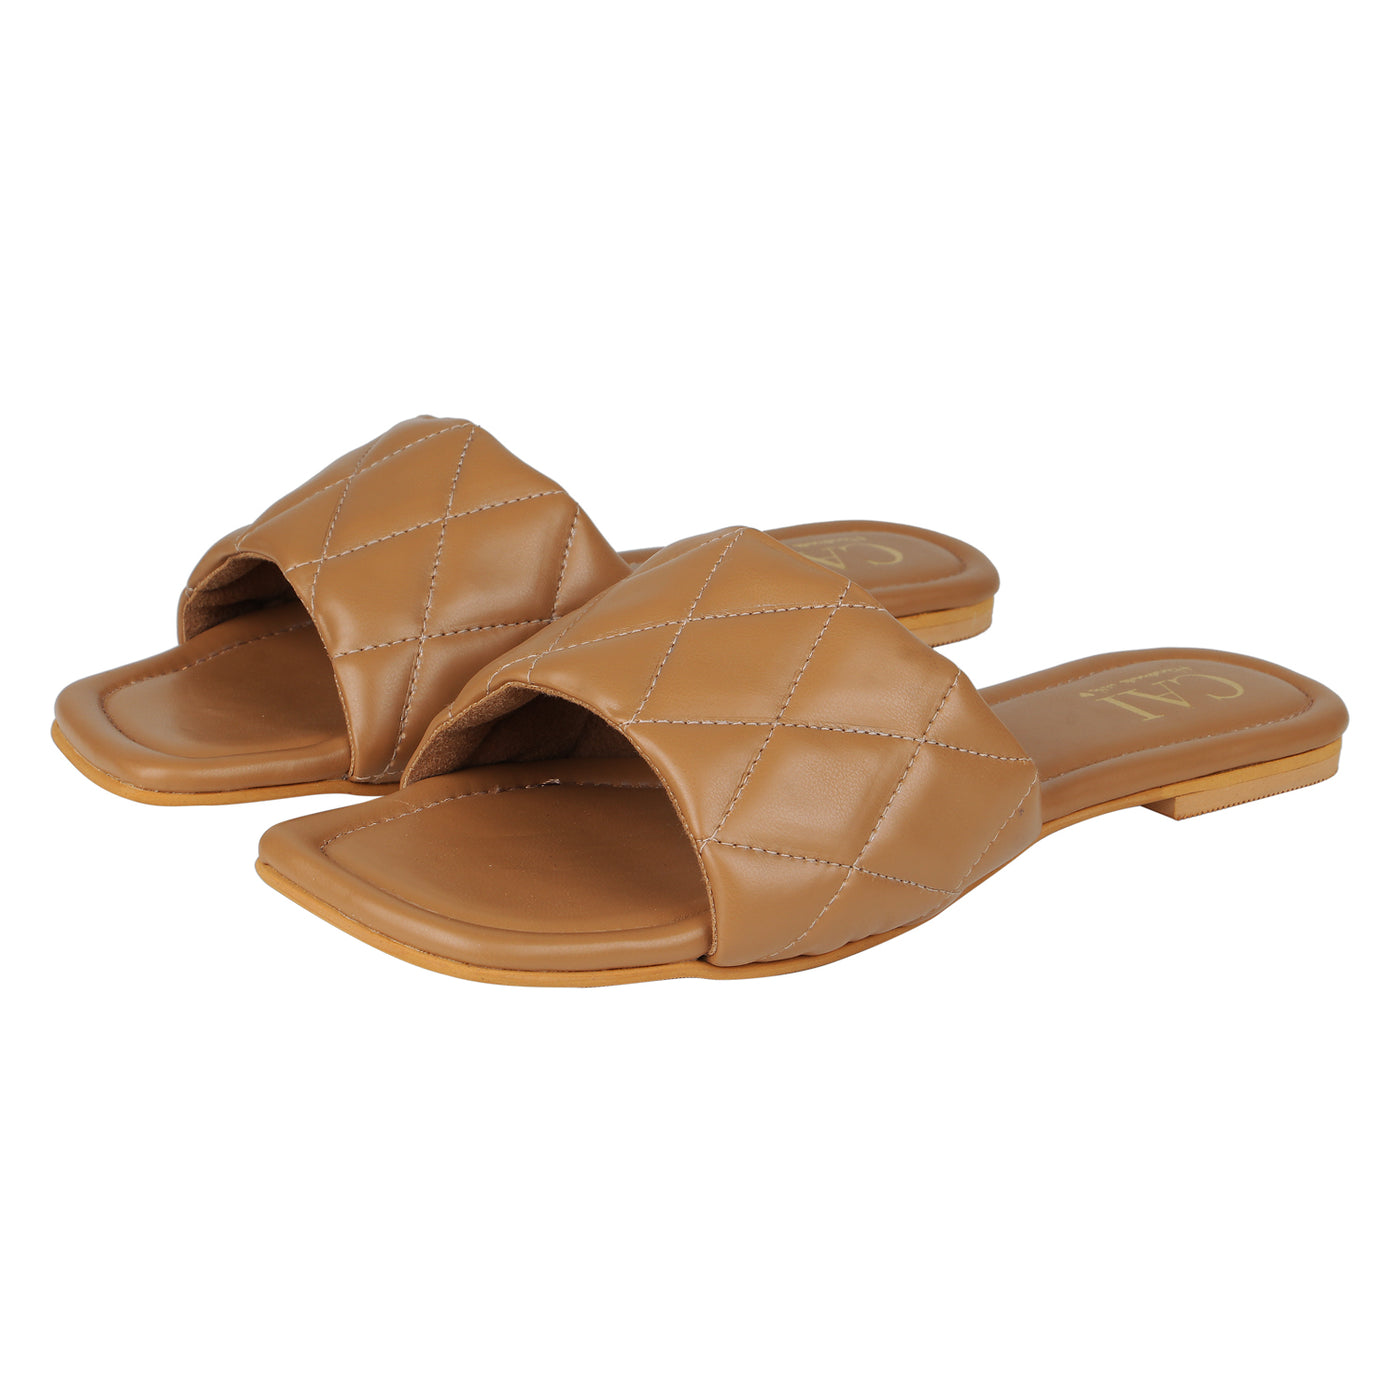 Get Handcrafted Textured Double Strap Slides at  859  LBB Shop